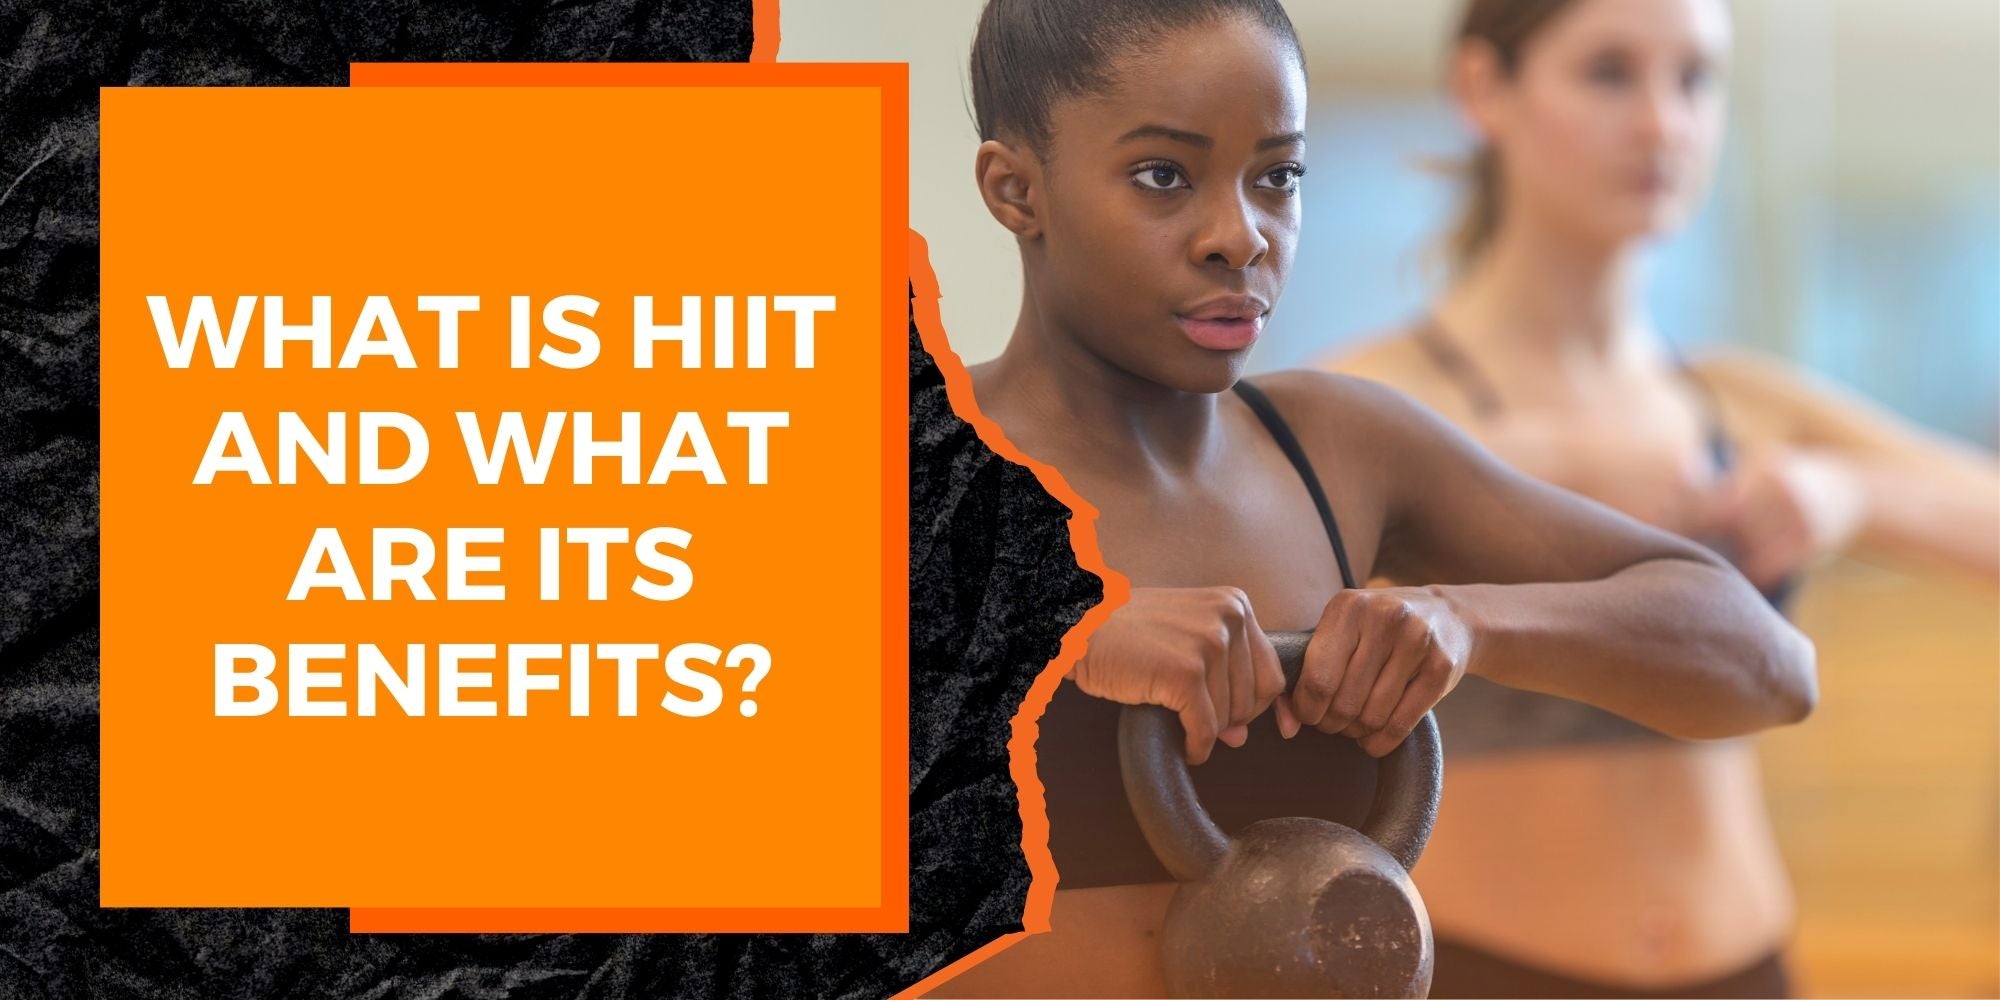 What Is HIIT and What Are Its Benefits?